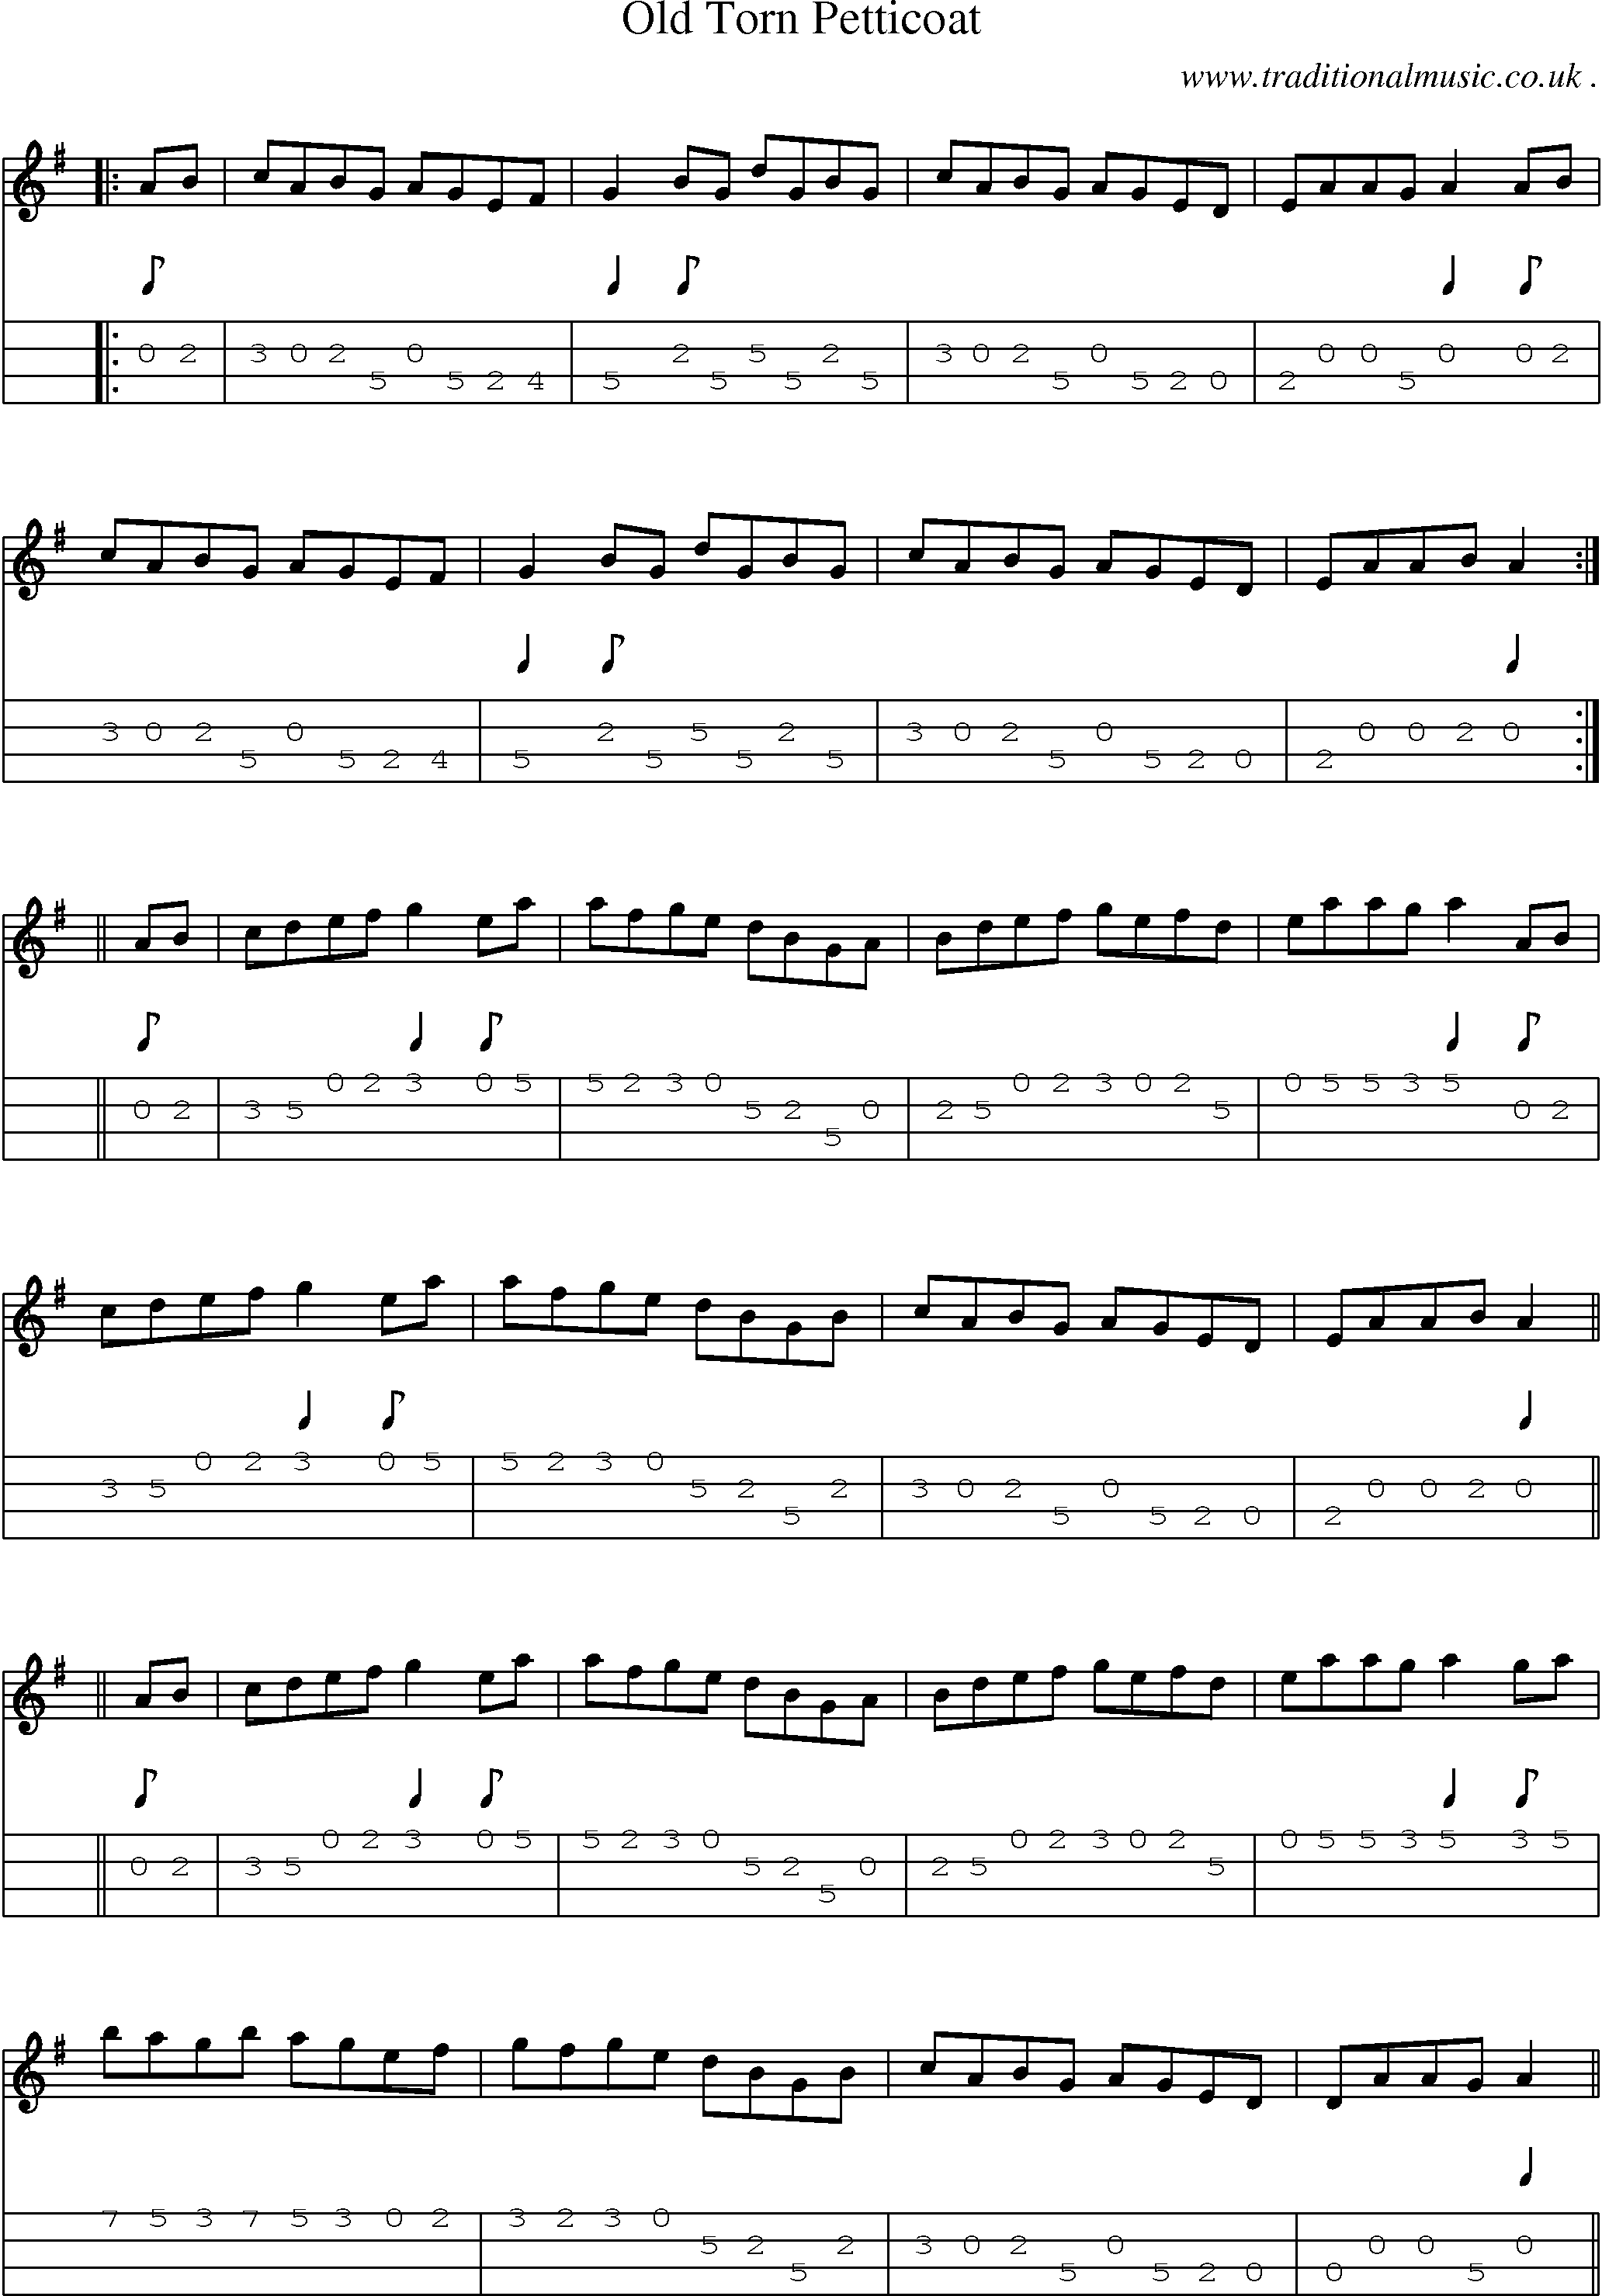 Sheet-Music and Mandolin Tabs for Old Torn Petticoat